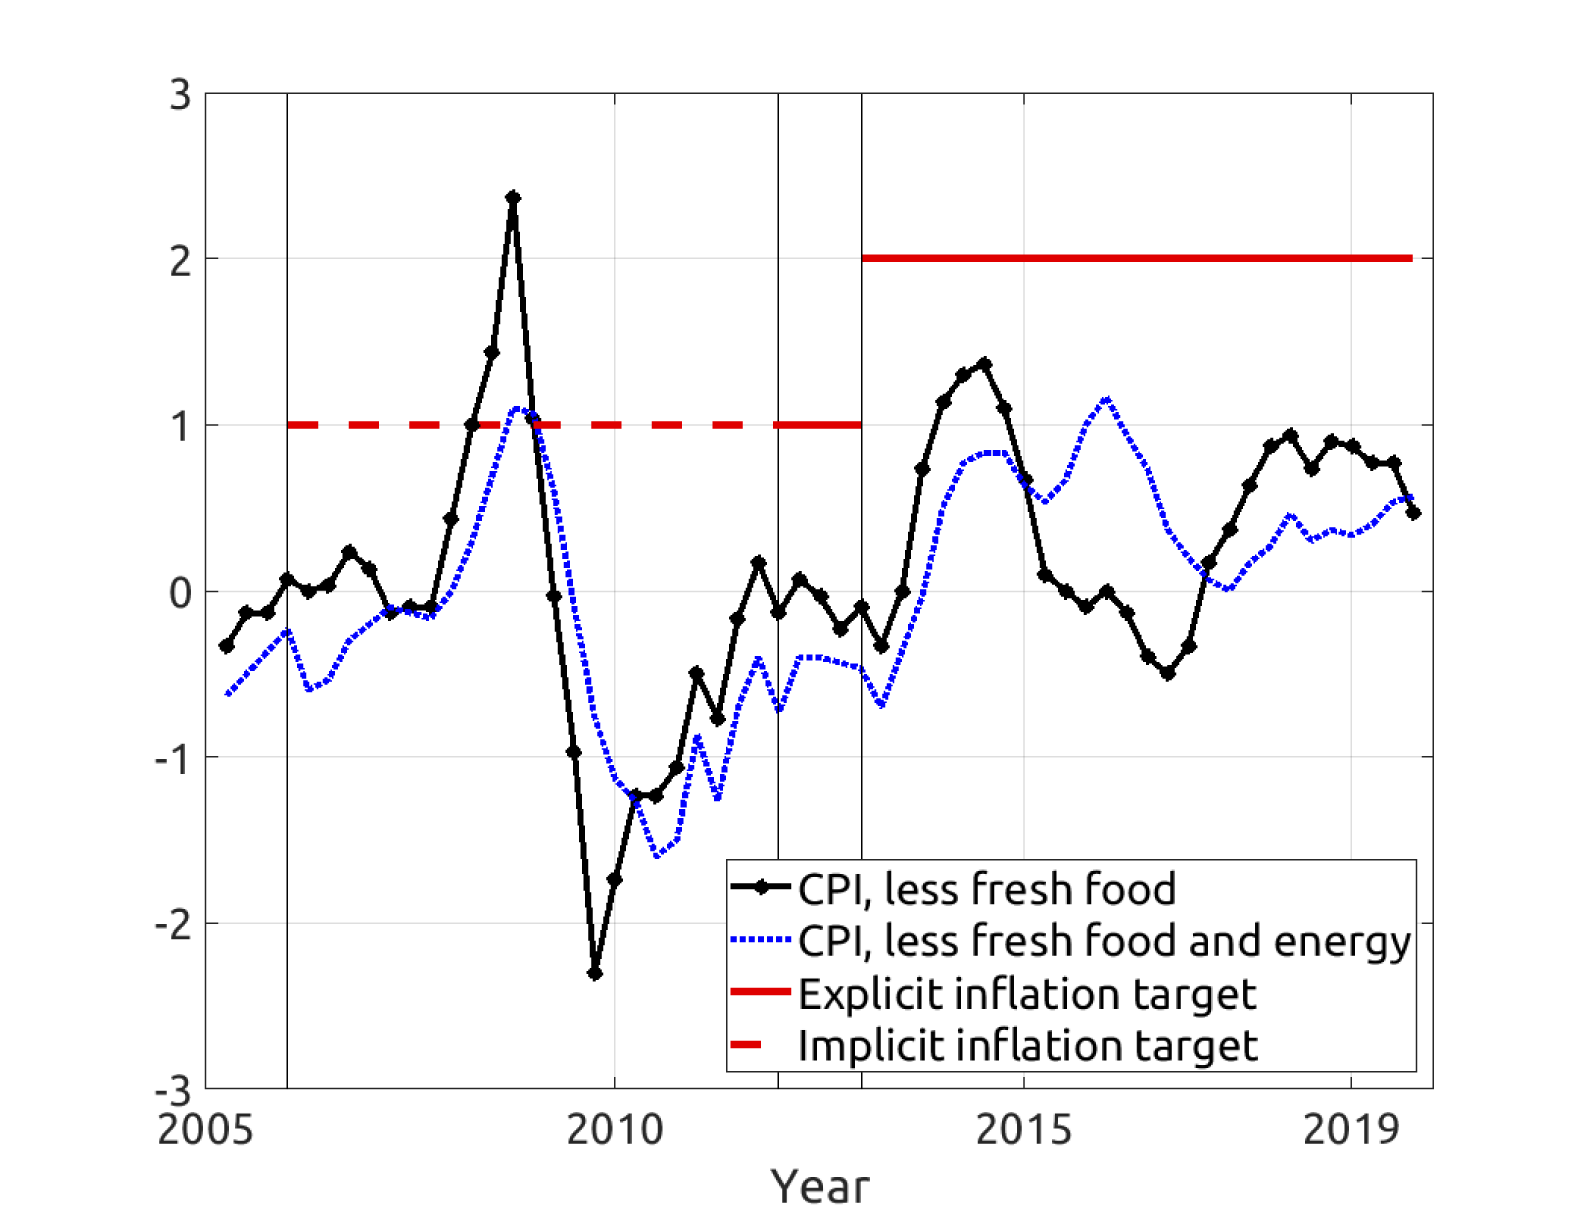 Figure 1. Inflation and inflation target in Japan. See accessible link for data description.